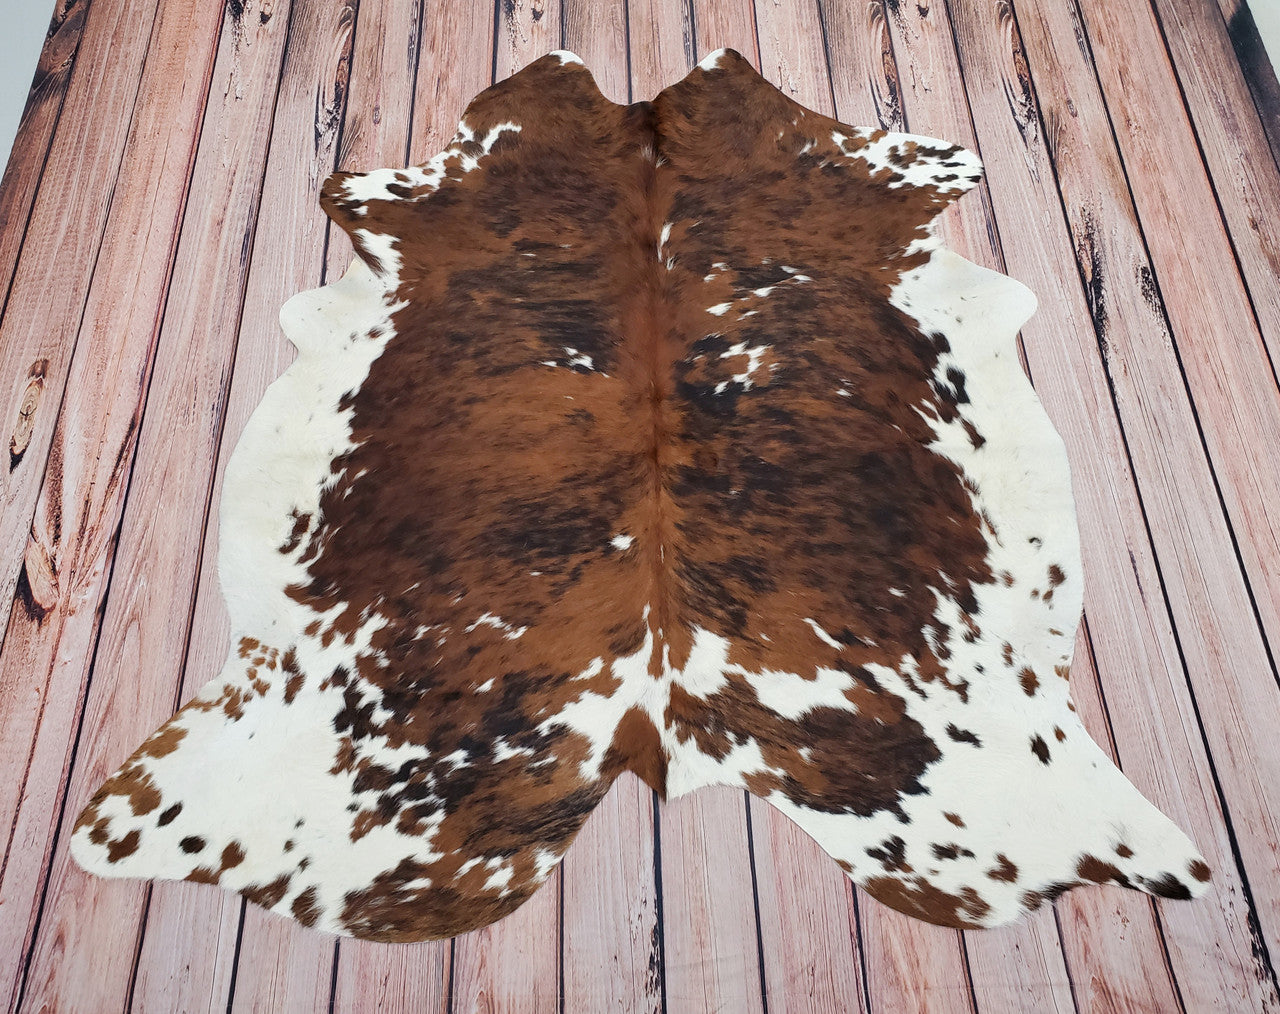 Design is breathtakingly beautiful for living room, I will really appreciate a review after your purchase, each oversize cowhide rug is handpicked